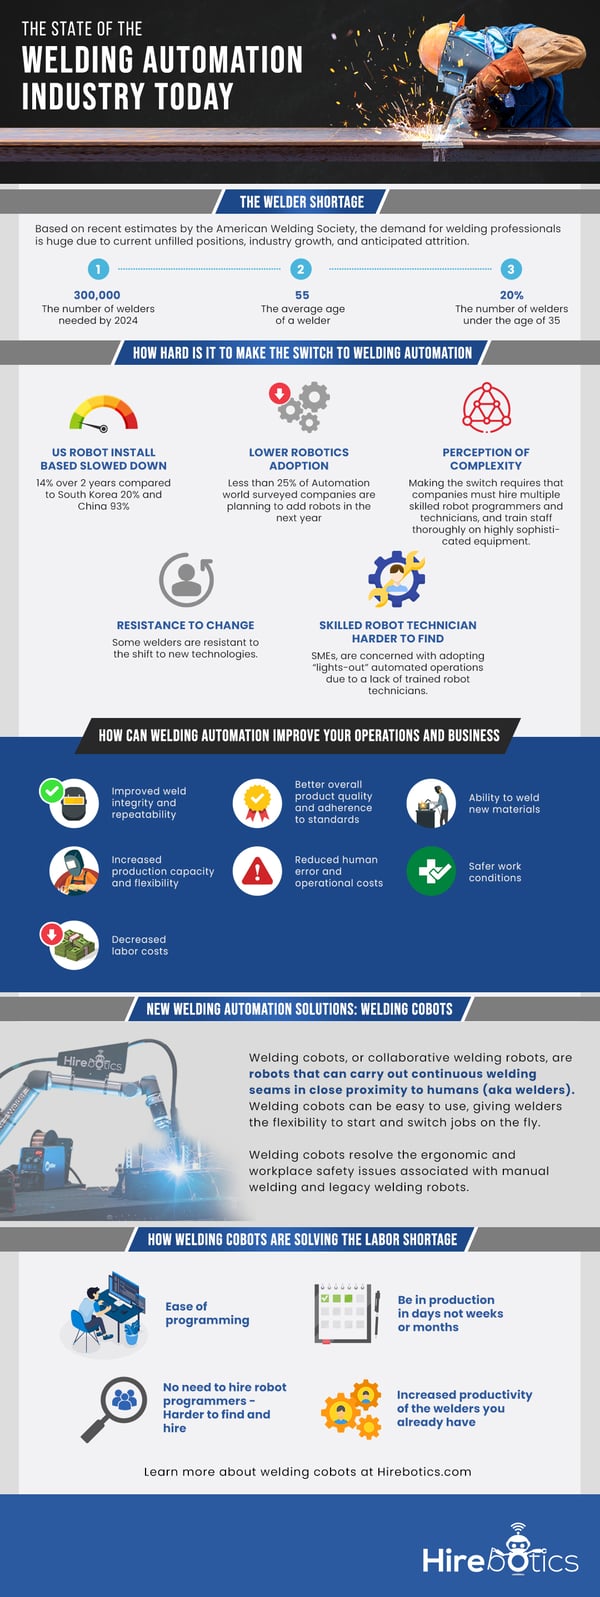 welding-automation-infographic